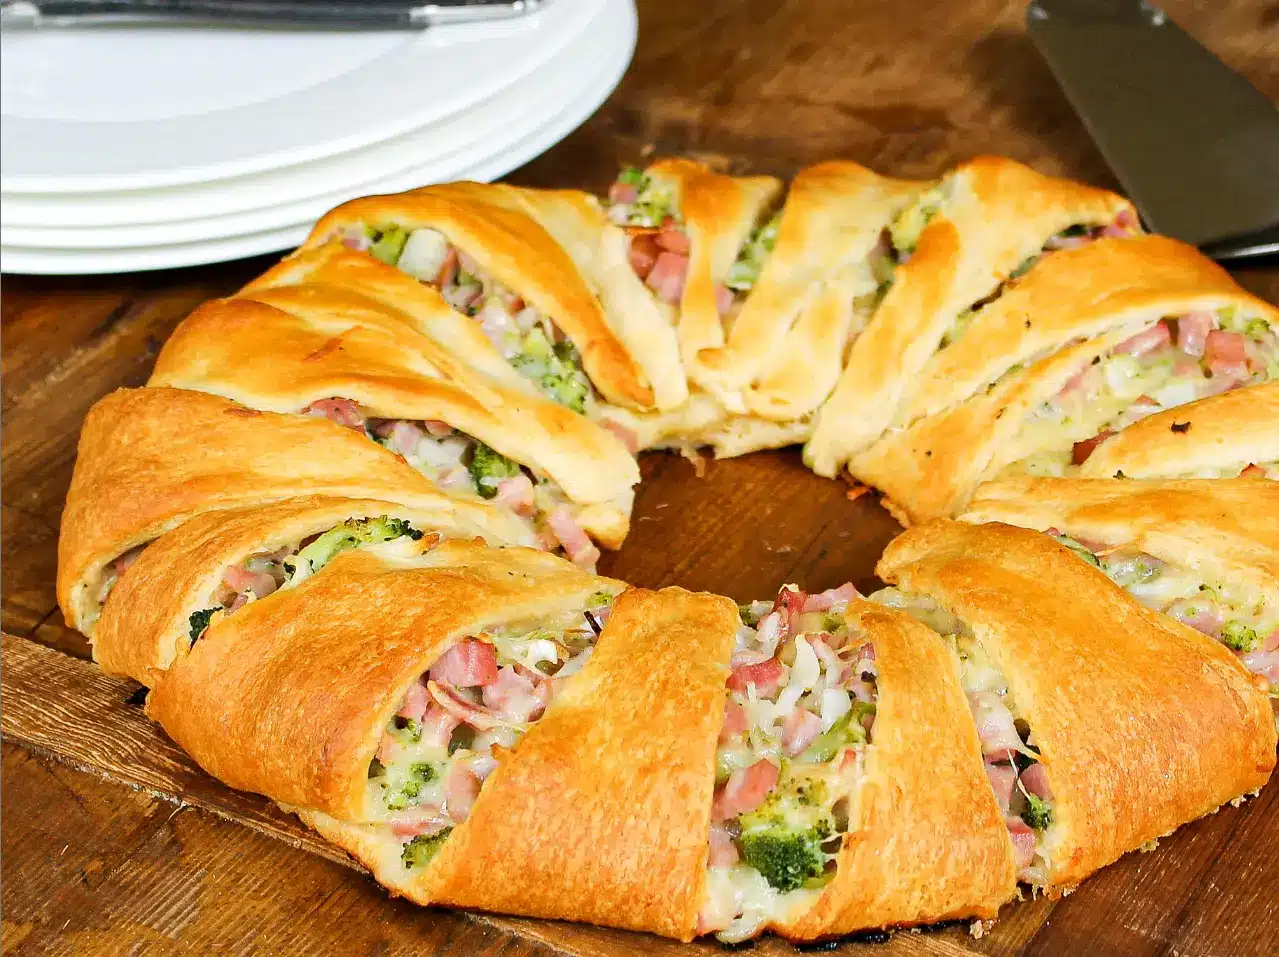 The image shows a freshly baked ring-shaped pastry, likely a crescent roll or similar dough, filled with a mix of ingredients that appear to be ham, cheese, and broccoli from publix recipes